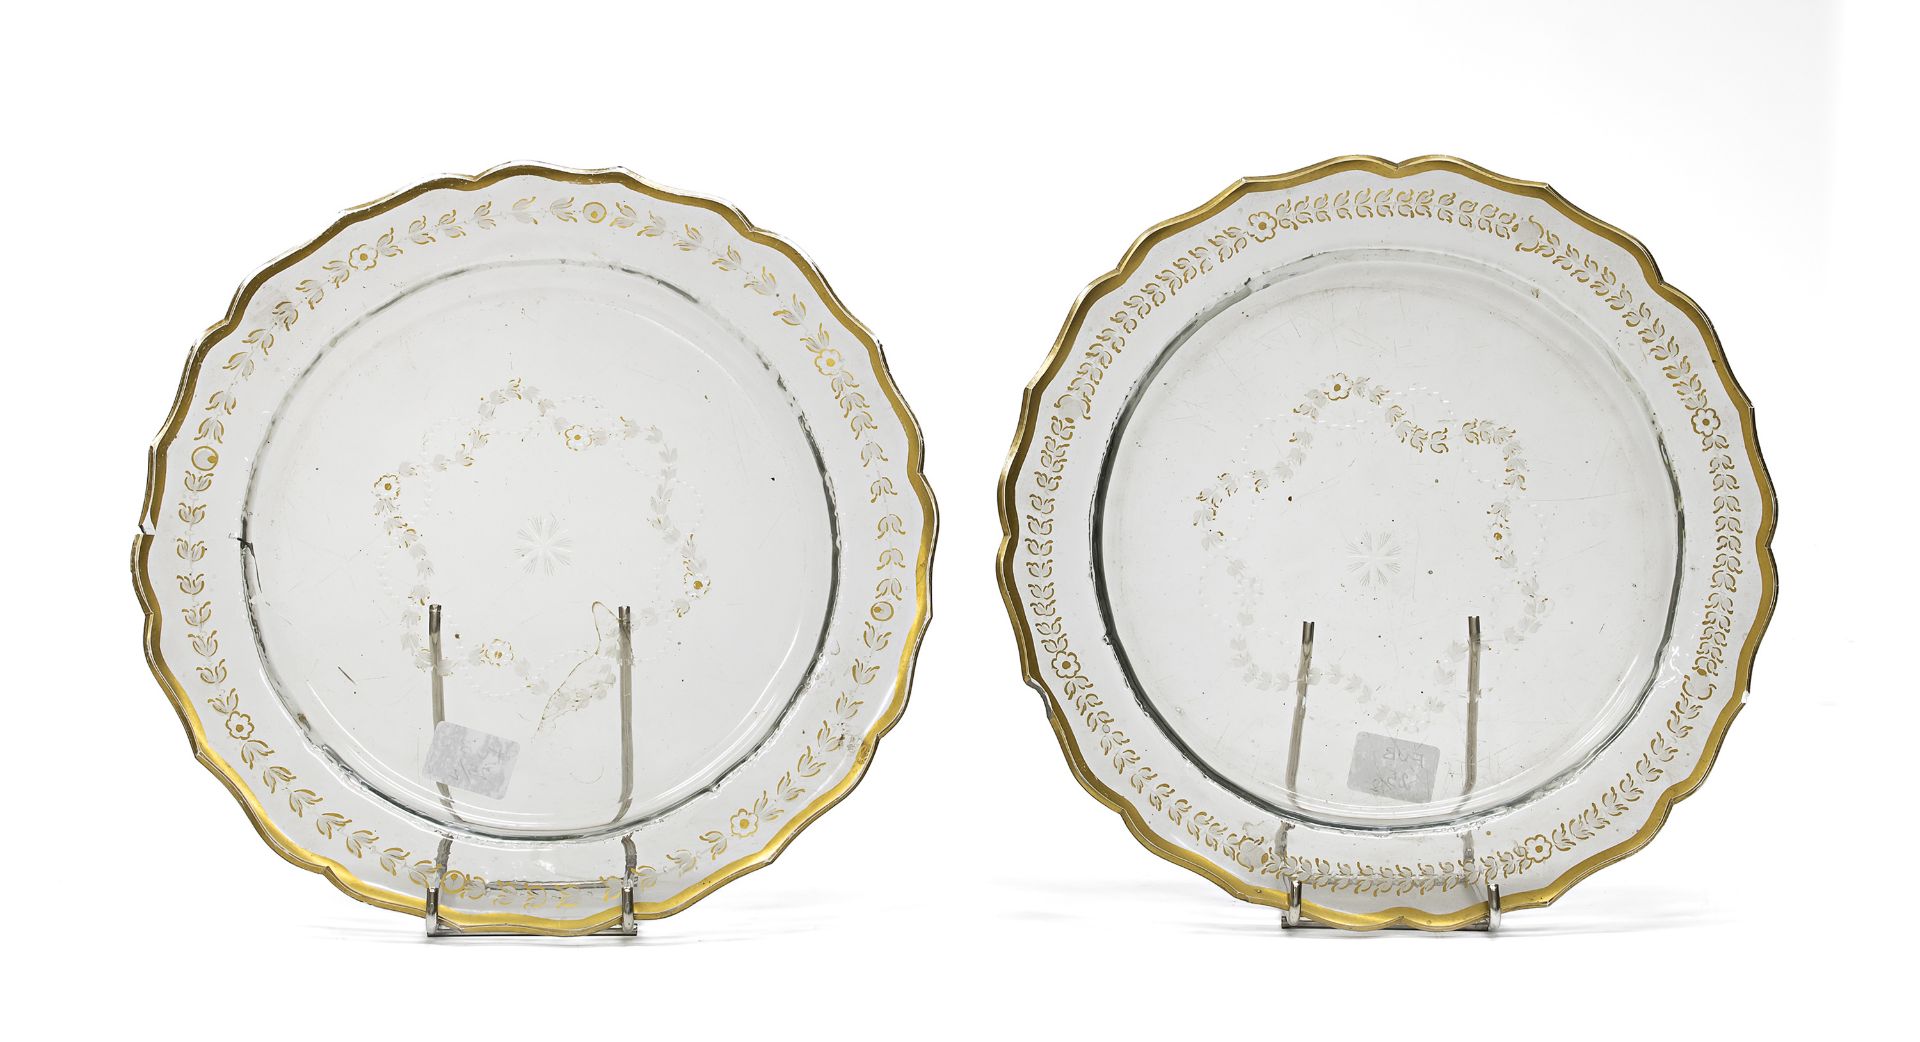 PAIR OF BLOWN GLASS PLATES EARLY 20TH CENTURY